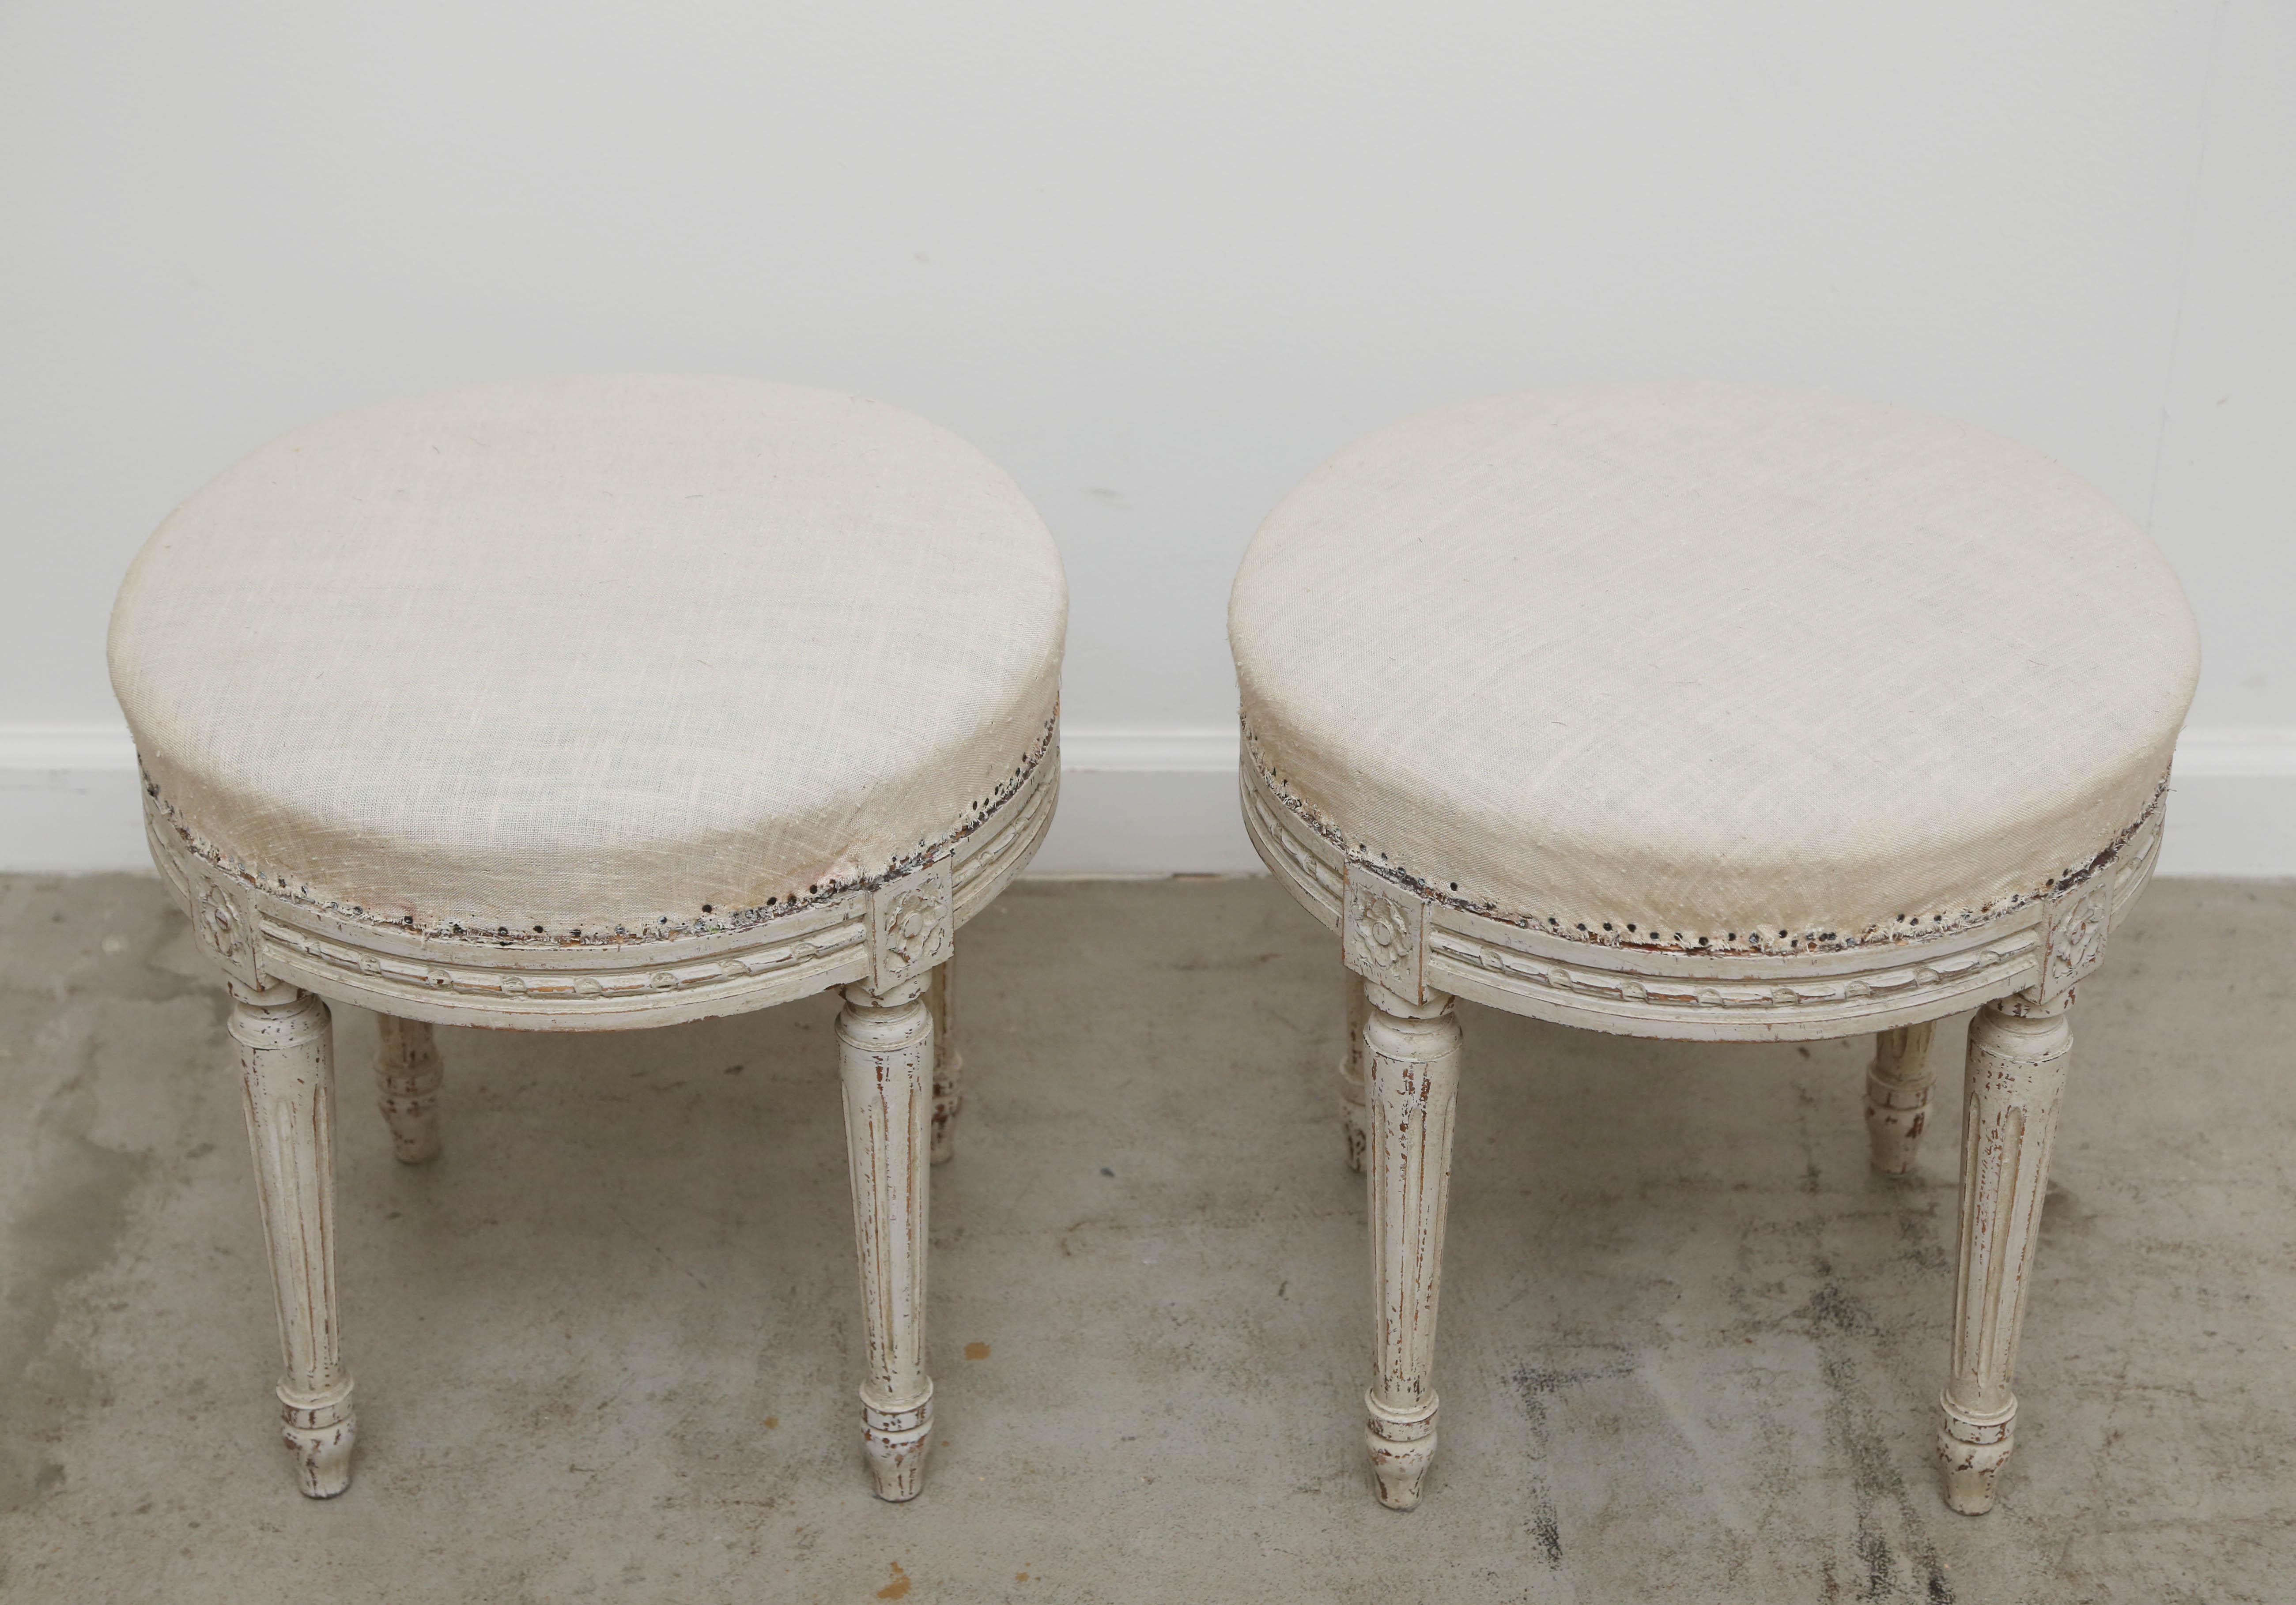 Pair of Swedish Gustavian style white/cream distressed painted stools. With carved rosette on top of each carved round fluted leg. Round seats are filled with original horsehair and covered in period woven muslin fabric,
late 19th